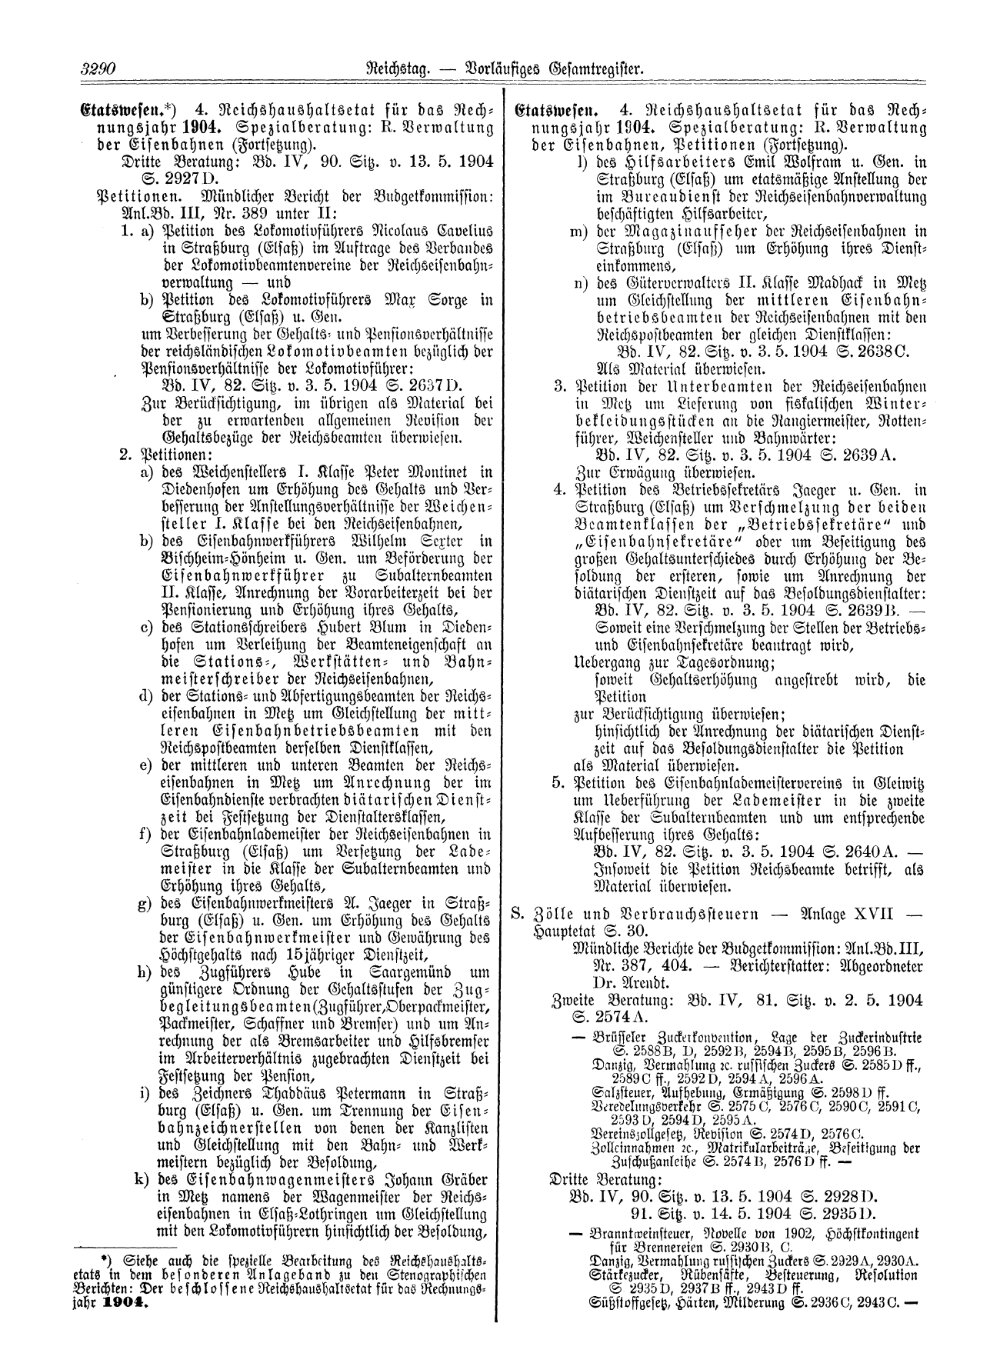 Scan of page 3290